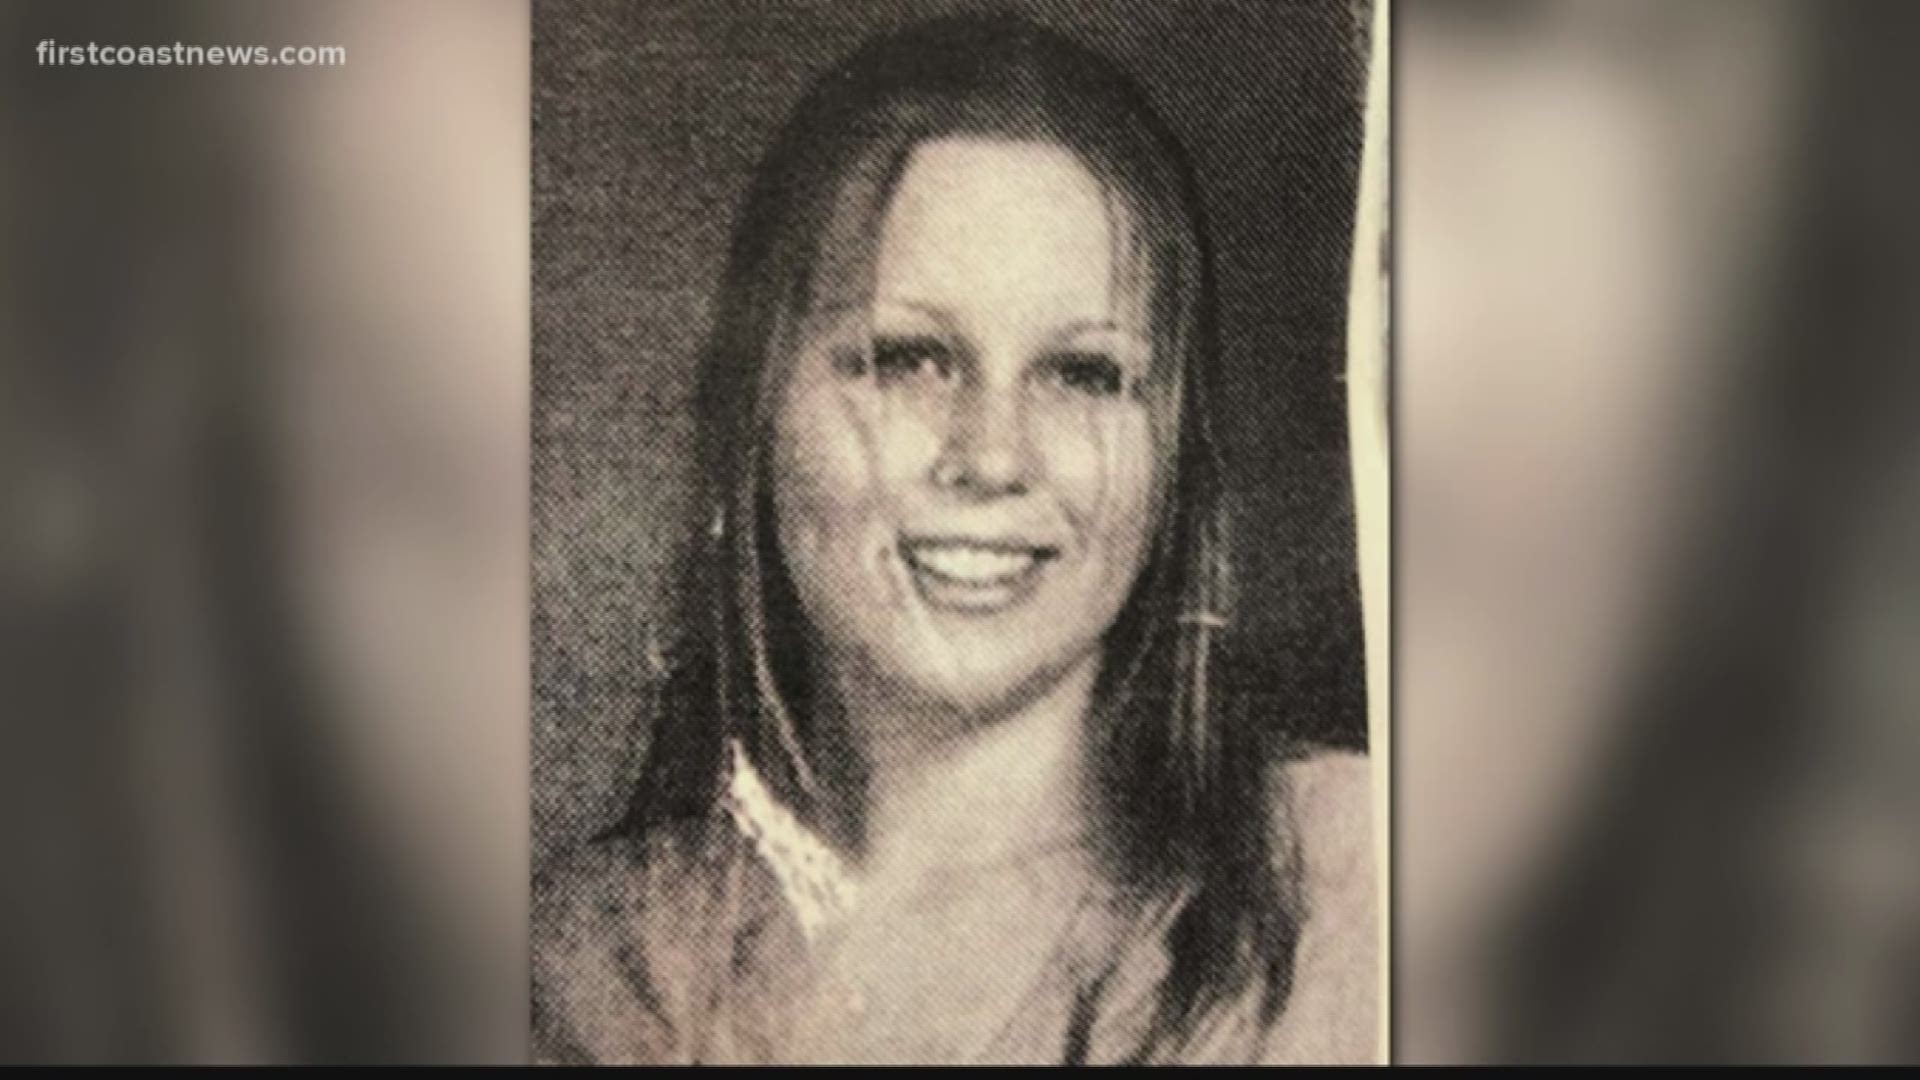 Thanks to the DNA Doe Project, investigators were able to confirm her identity as 21-year-old Dana Lynn Dodd.